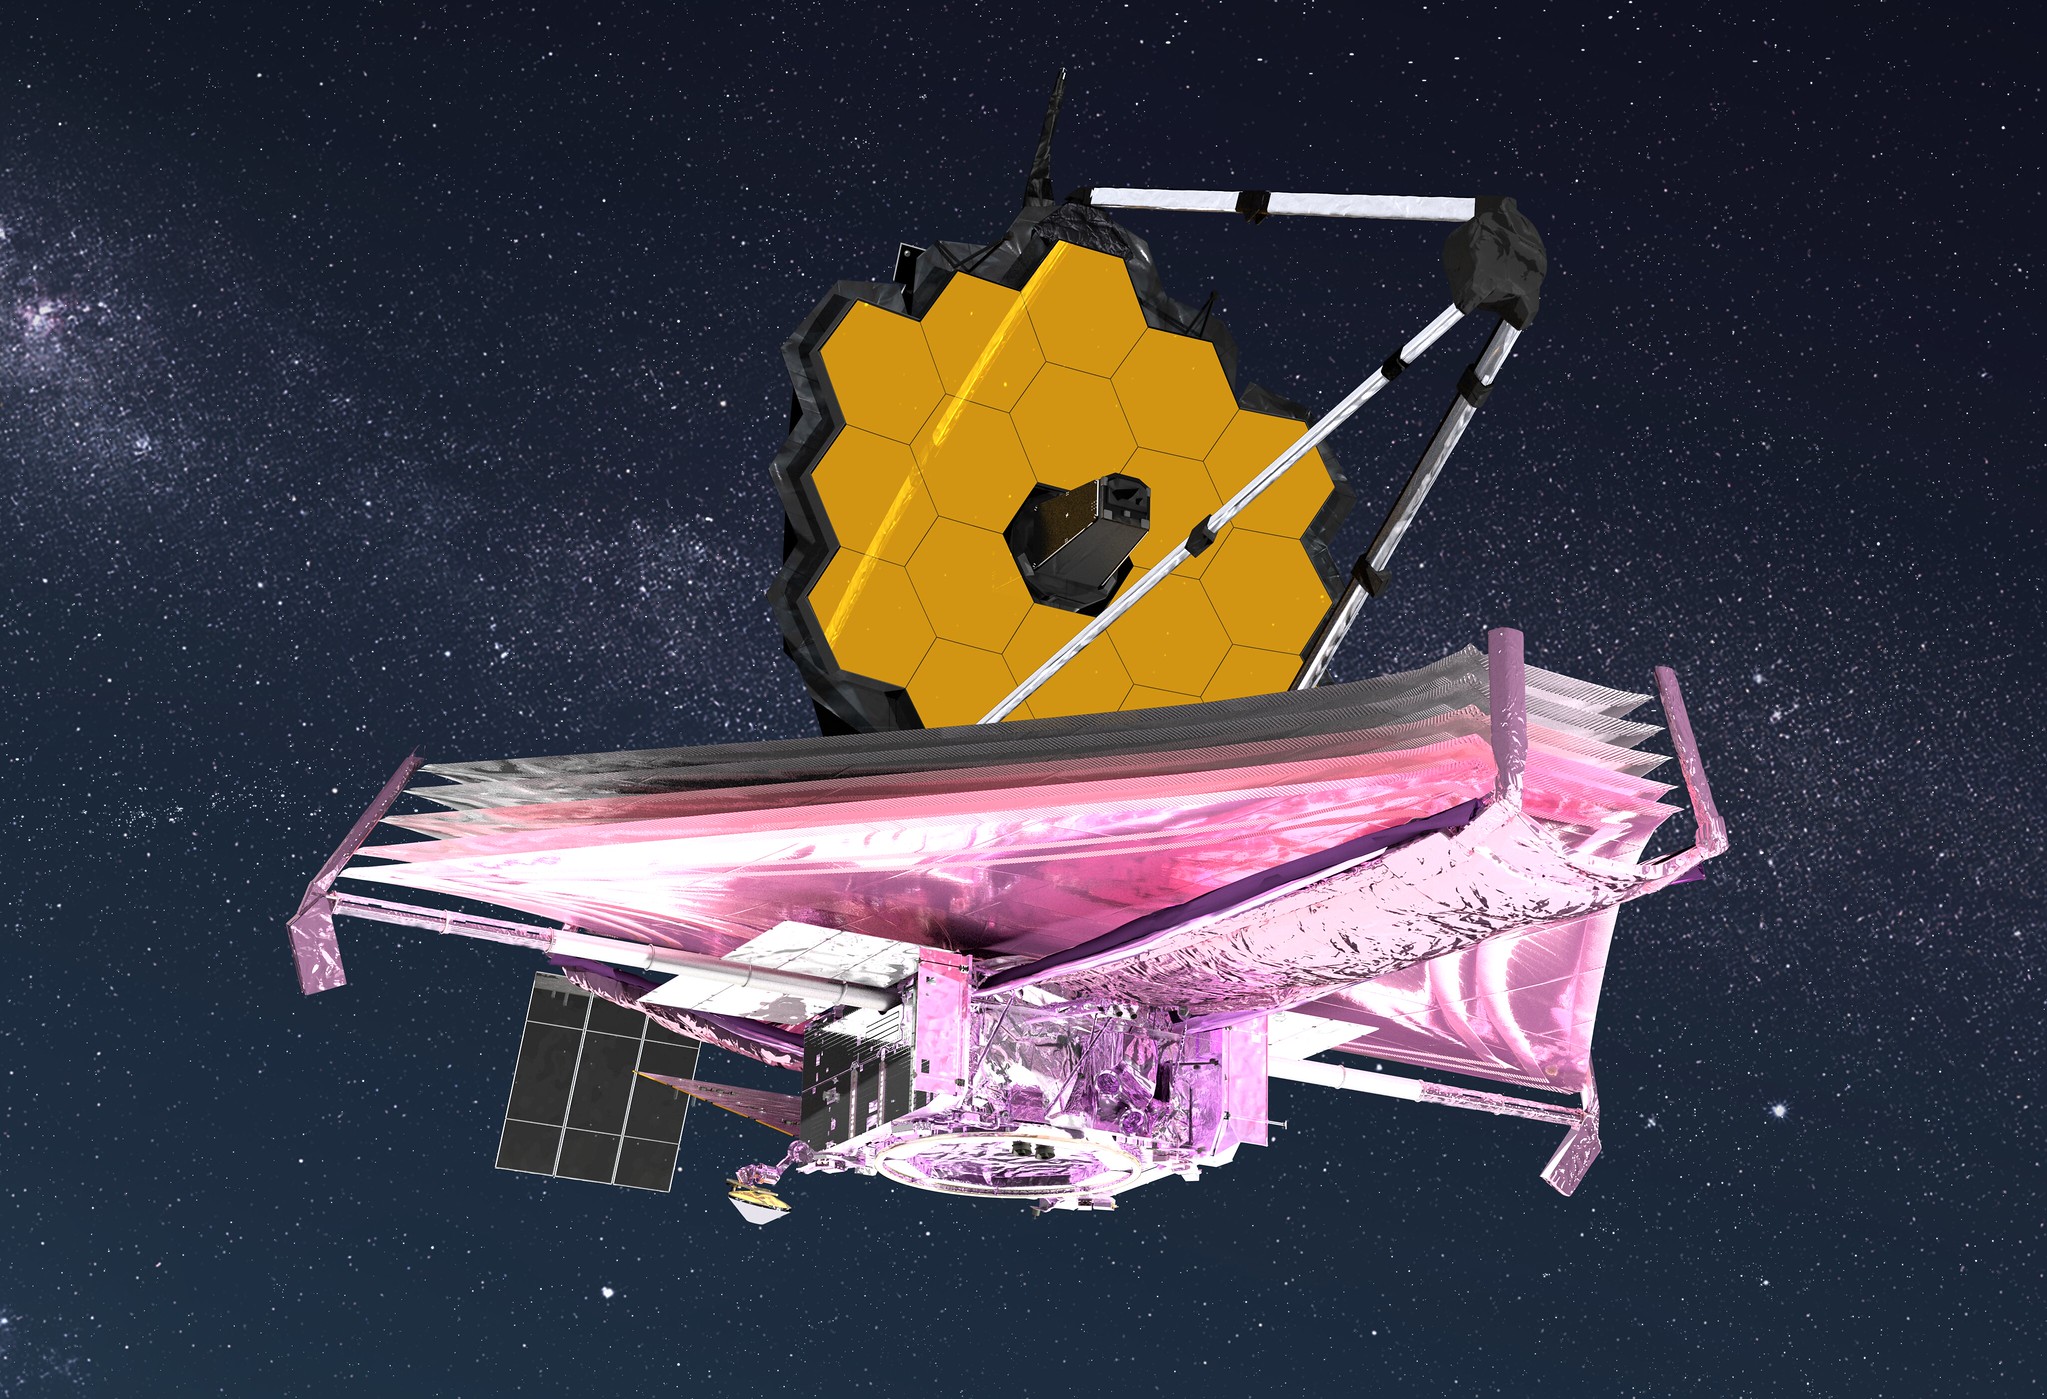 Daily News | Online News NASA's James Webb Space Telescope, seen here in an artist's illustration, deployed its final primary mirror segment on Jan. 8, 2022, a critical milestone for its mission to study the universe.